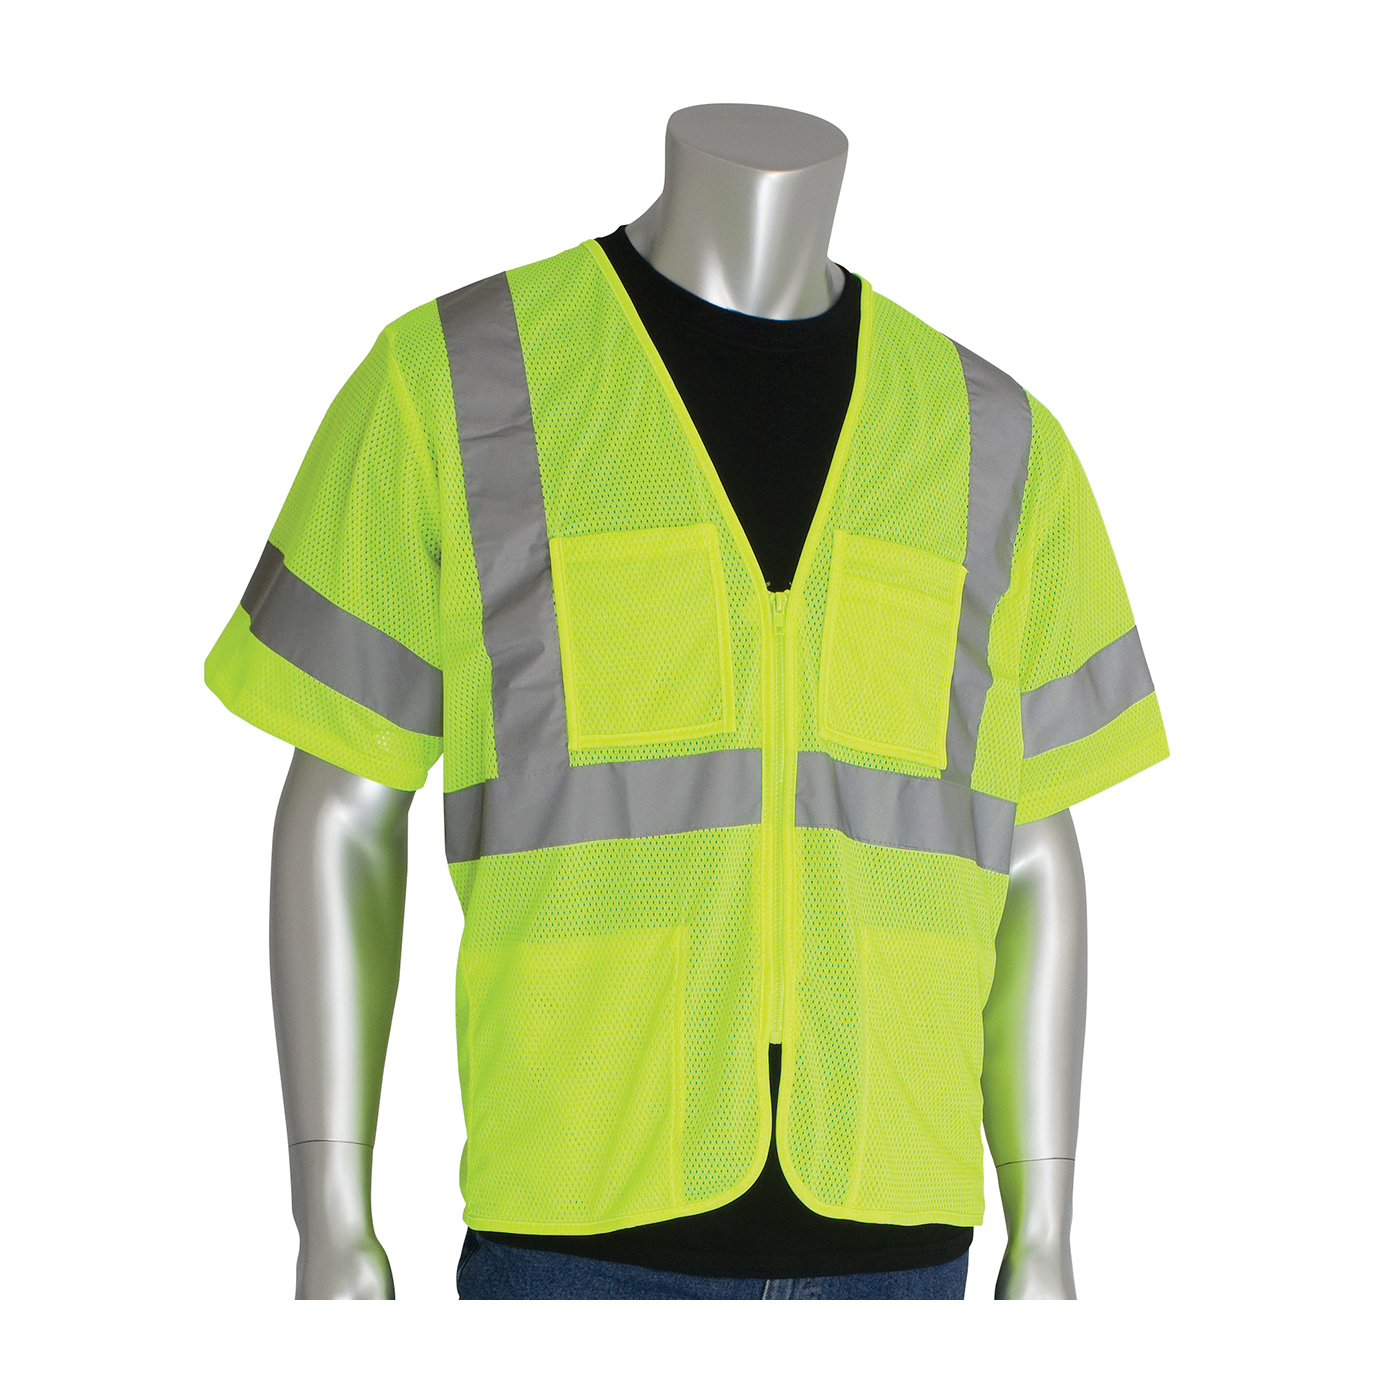 PIP® 303-MVGZ4P-LY/L Safety Vest, L, Hi-Viz Lime Yellow, Polyester Mesh, Zipper Closure, 4 Pockets, ANSI Class: Class 3, Specifications Met: ANSI 107 Type R